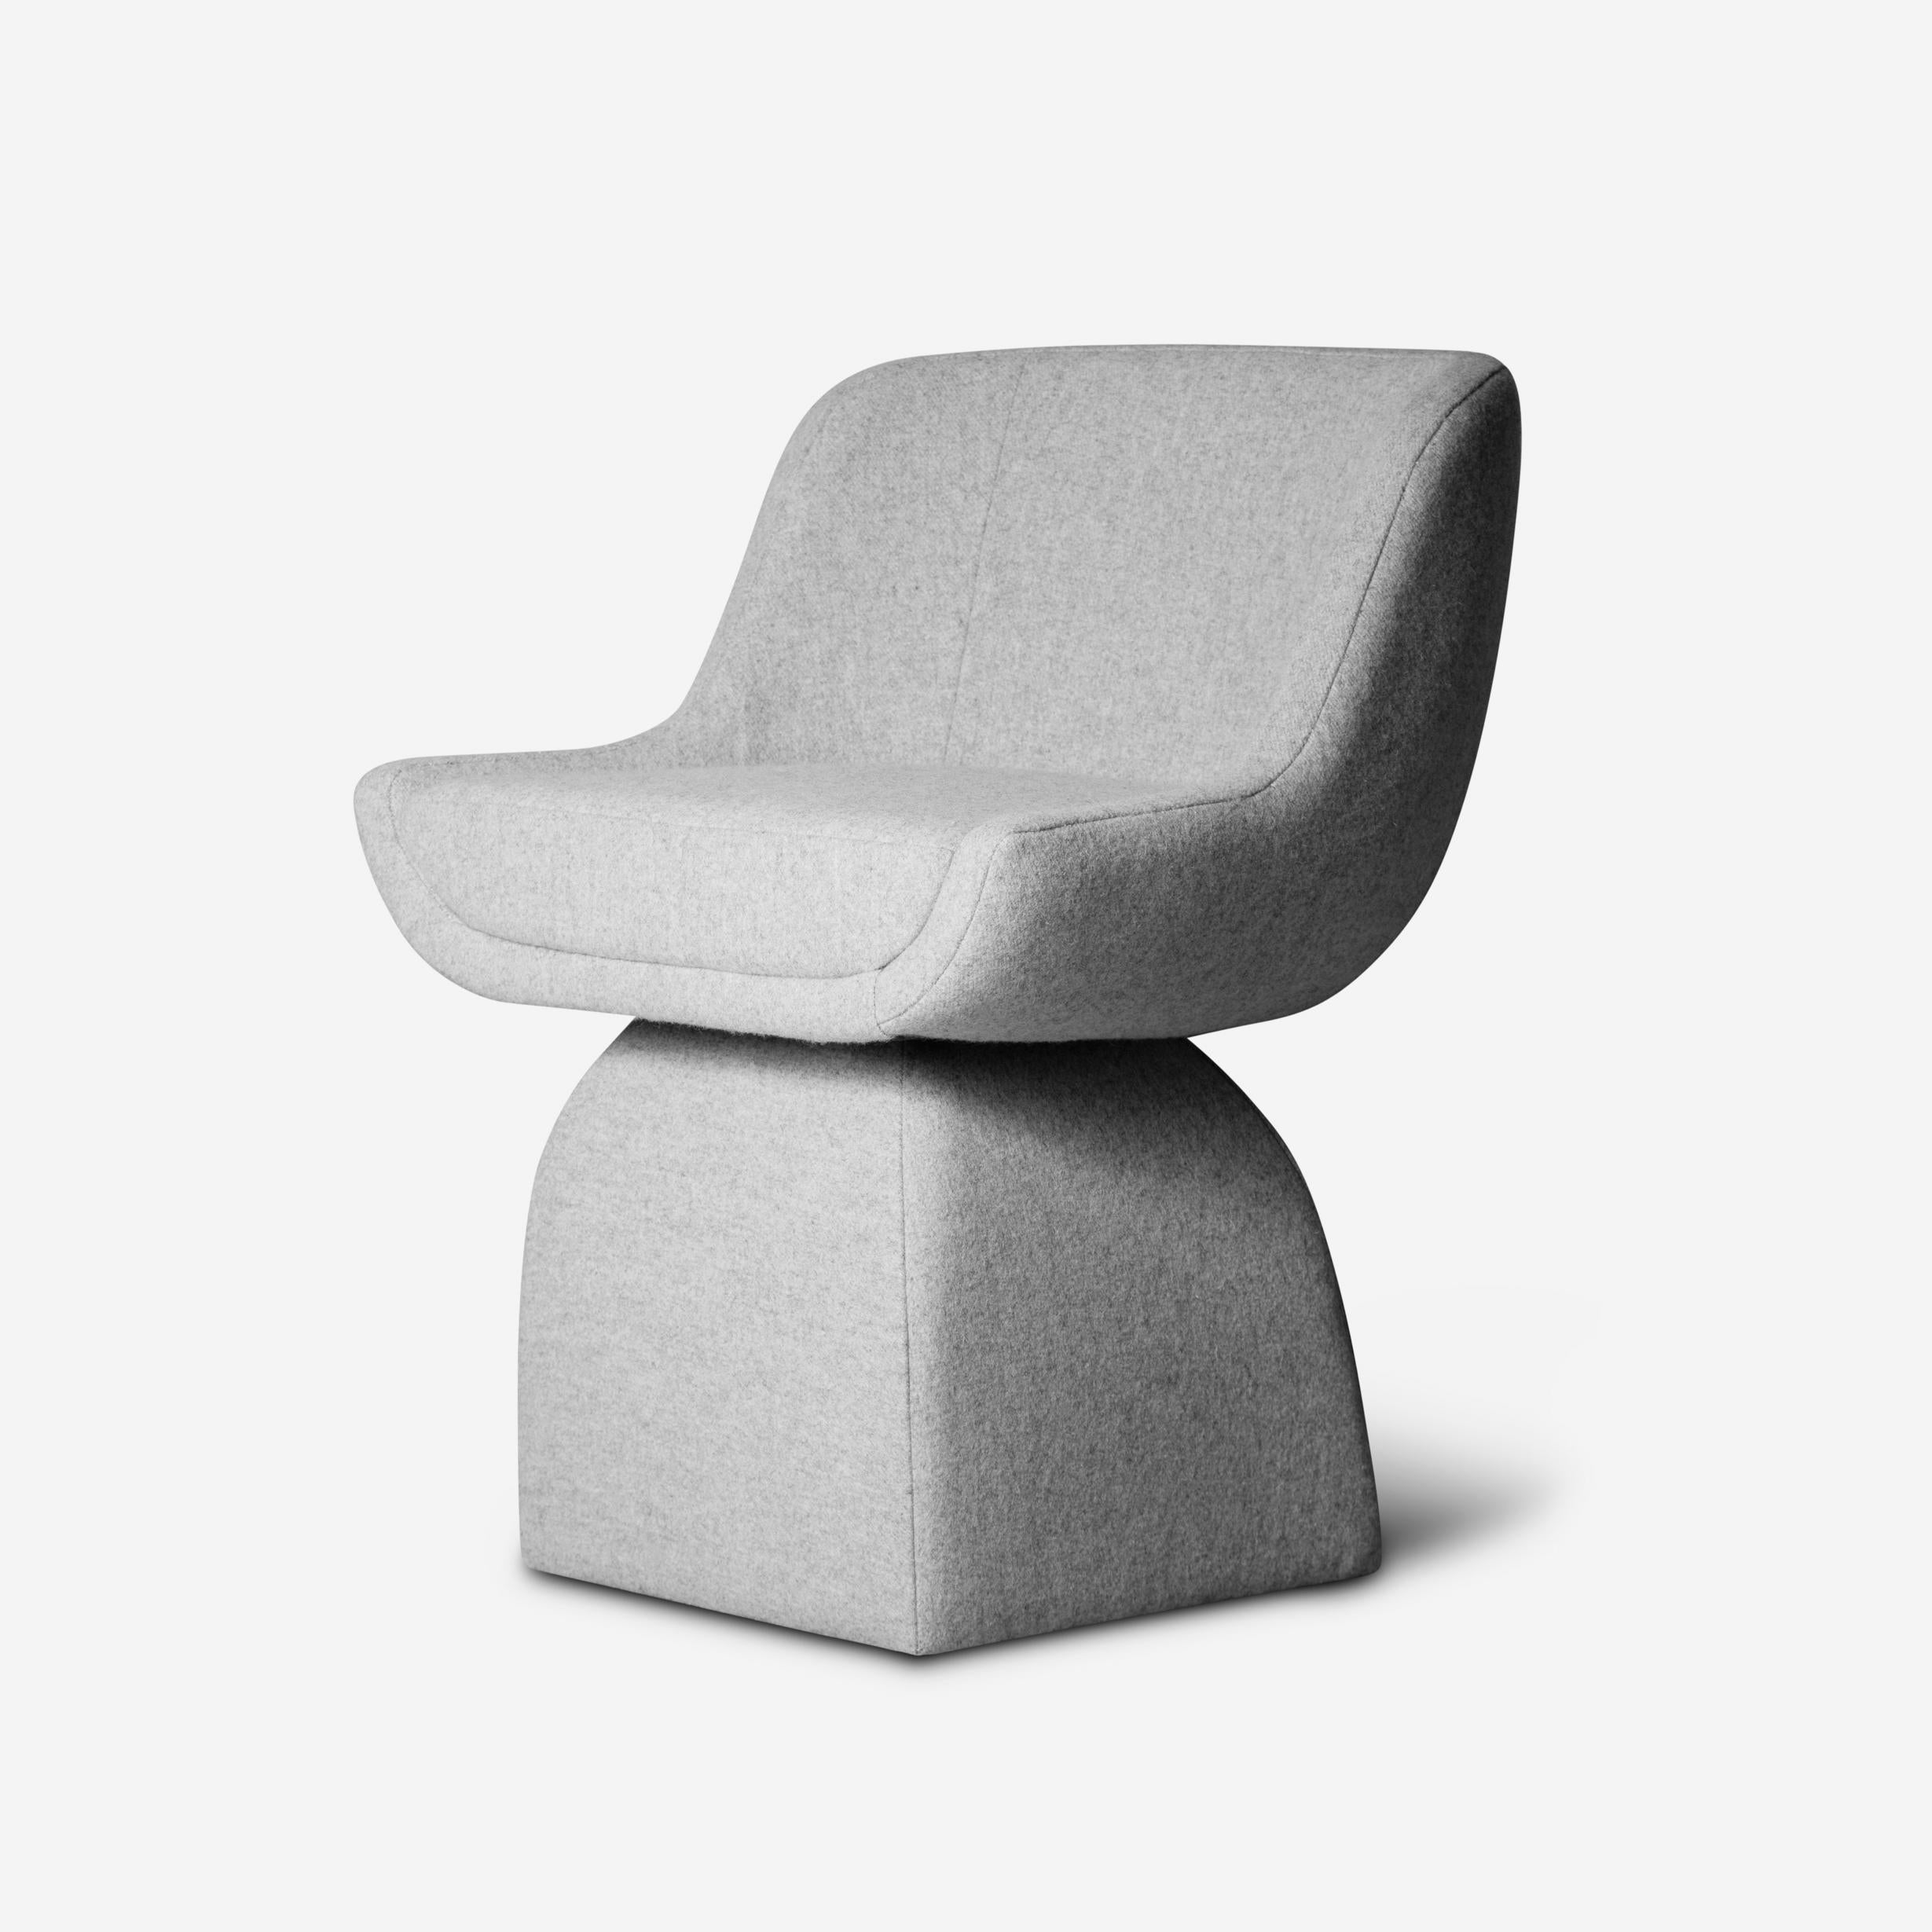 Small Oscar Chair by DUISTT 
Dimensions: W 60 x D 58 x H 77 cm
Materials: Duistt Fabric
Swivel version available upon request. Please contact us.

Inspired by the curved lines poetry of Oscar Niemeyer’s architecture, OSCAR small chair allures for